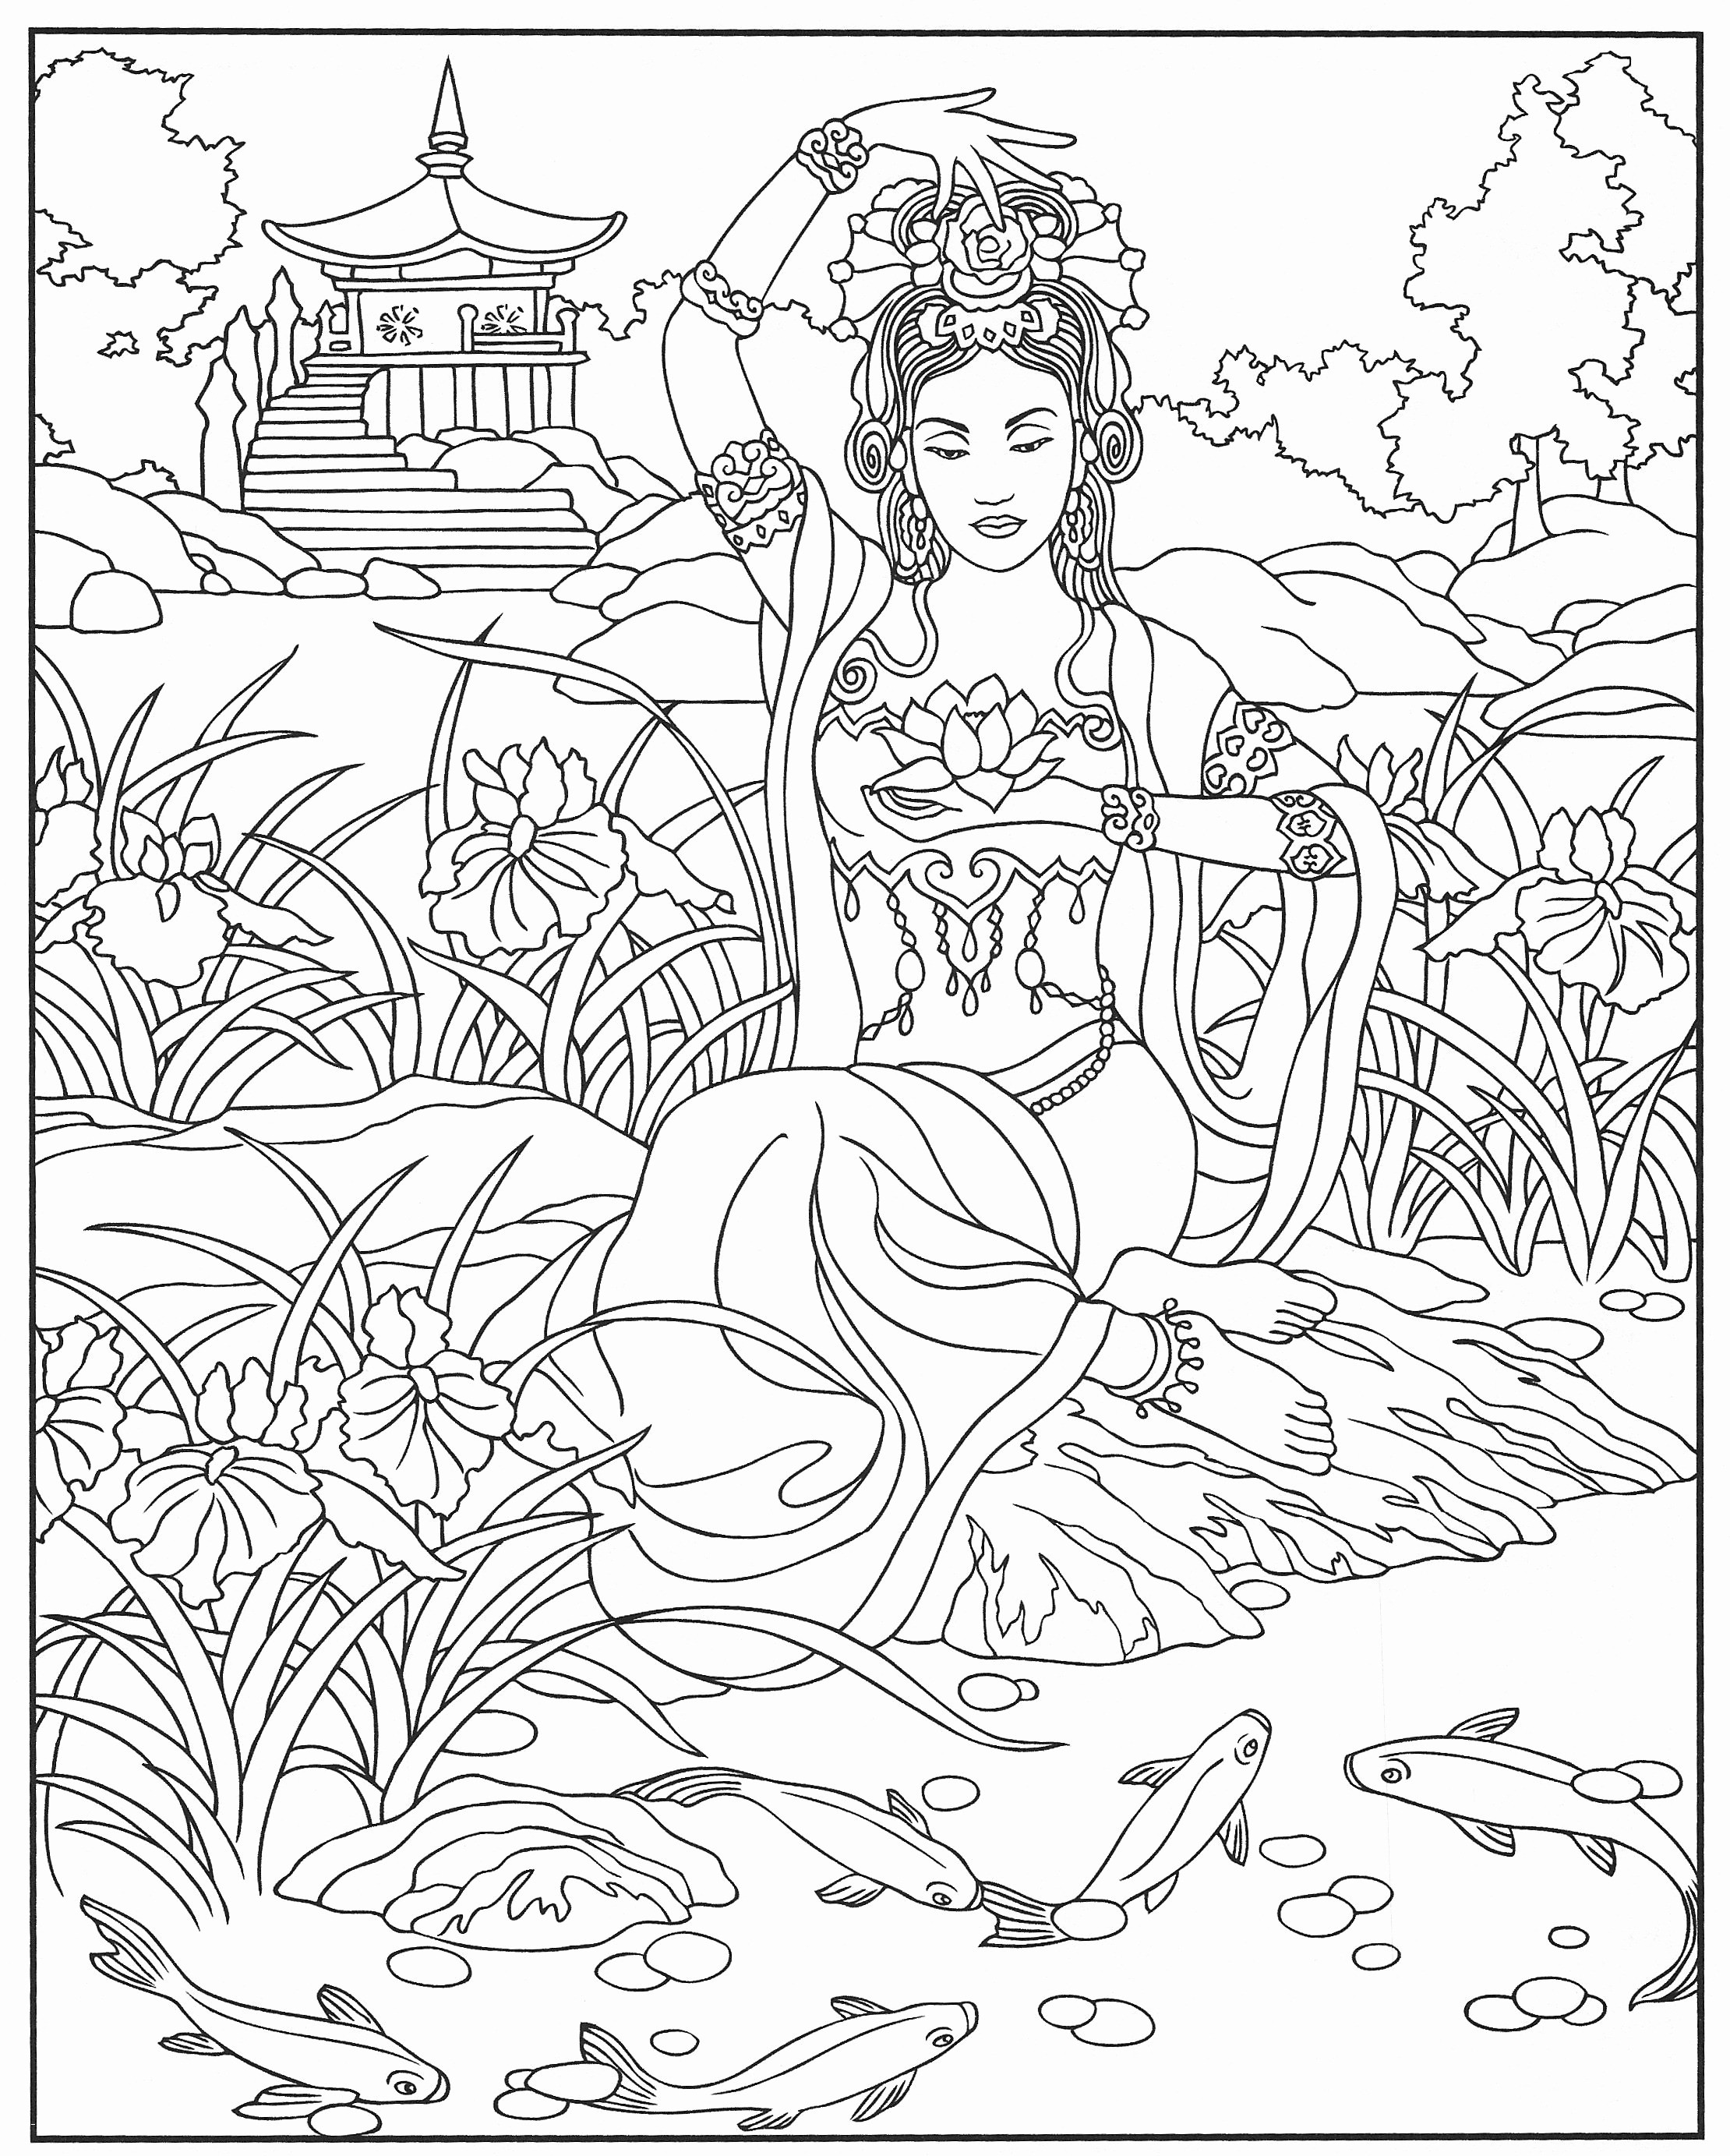 coloring pages new cool coloring page unique witch coloring pages new crayola pages 0d of coloring pages